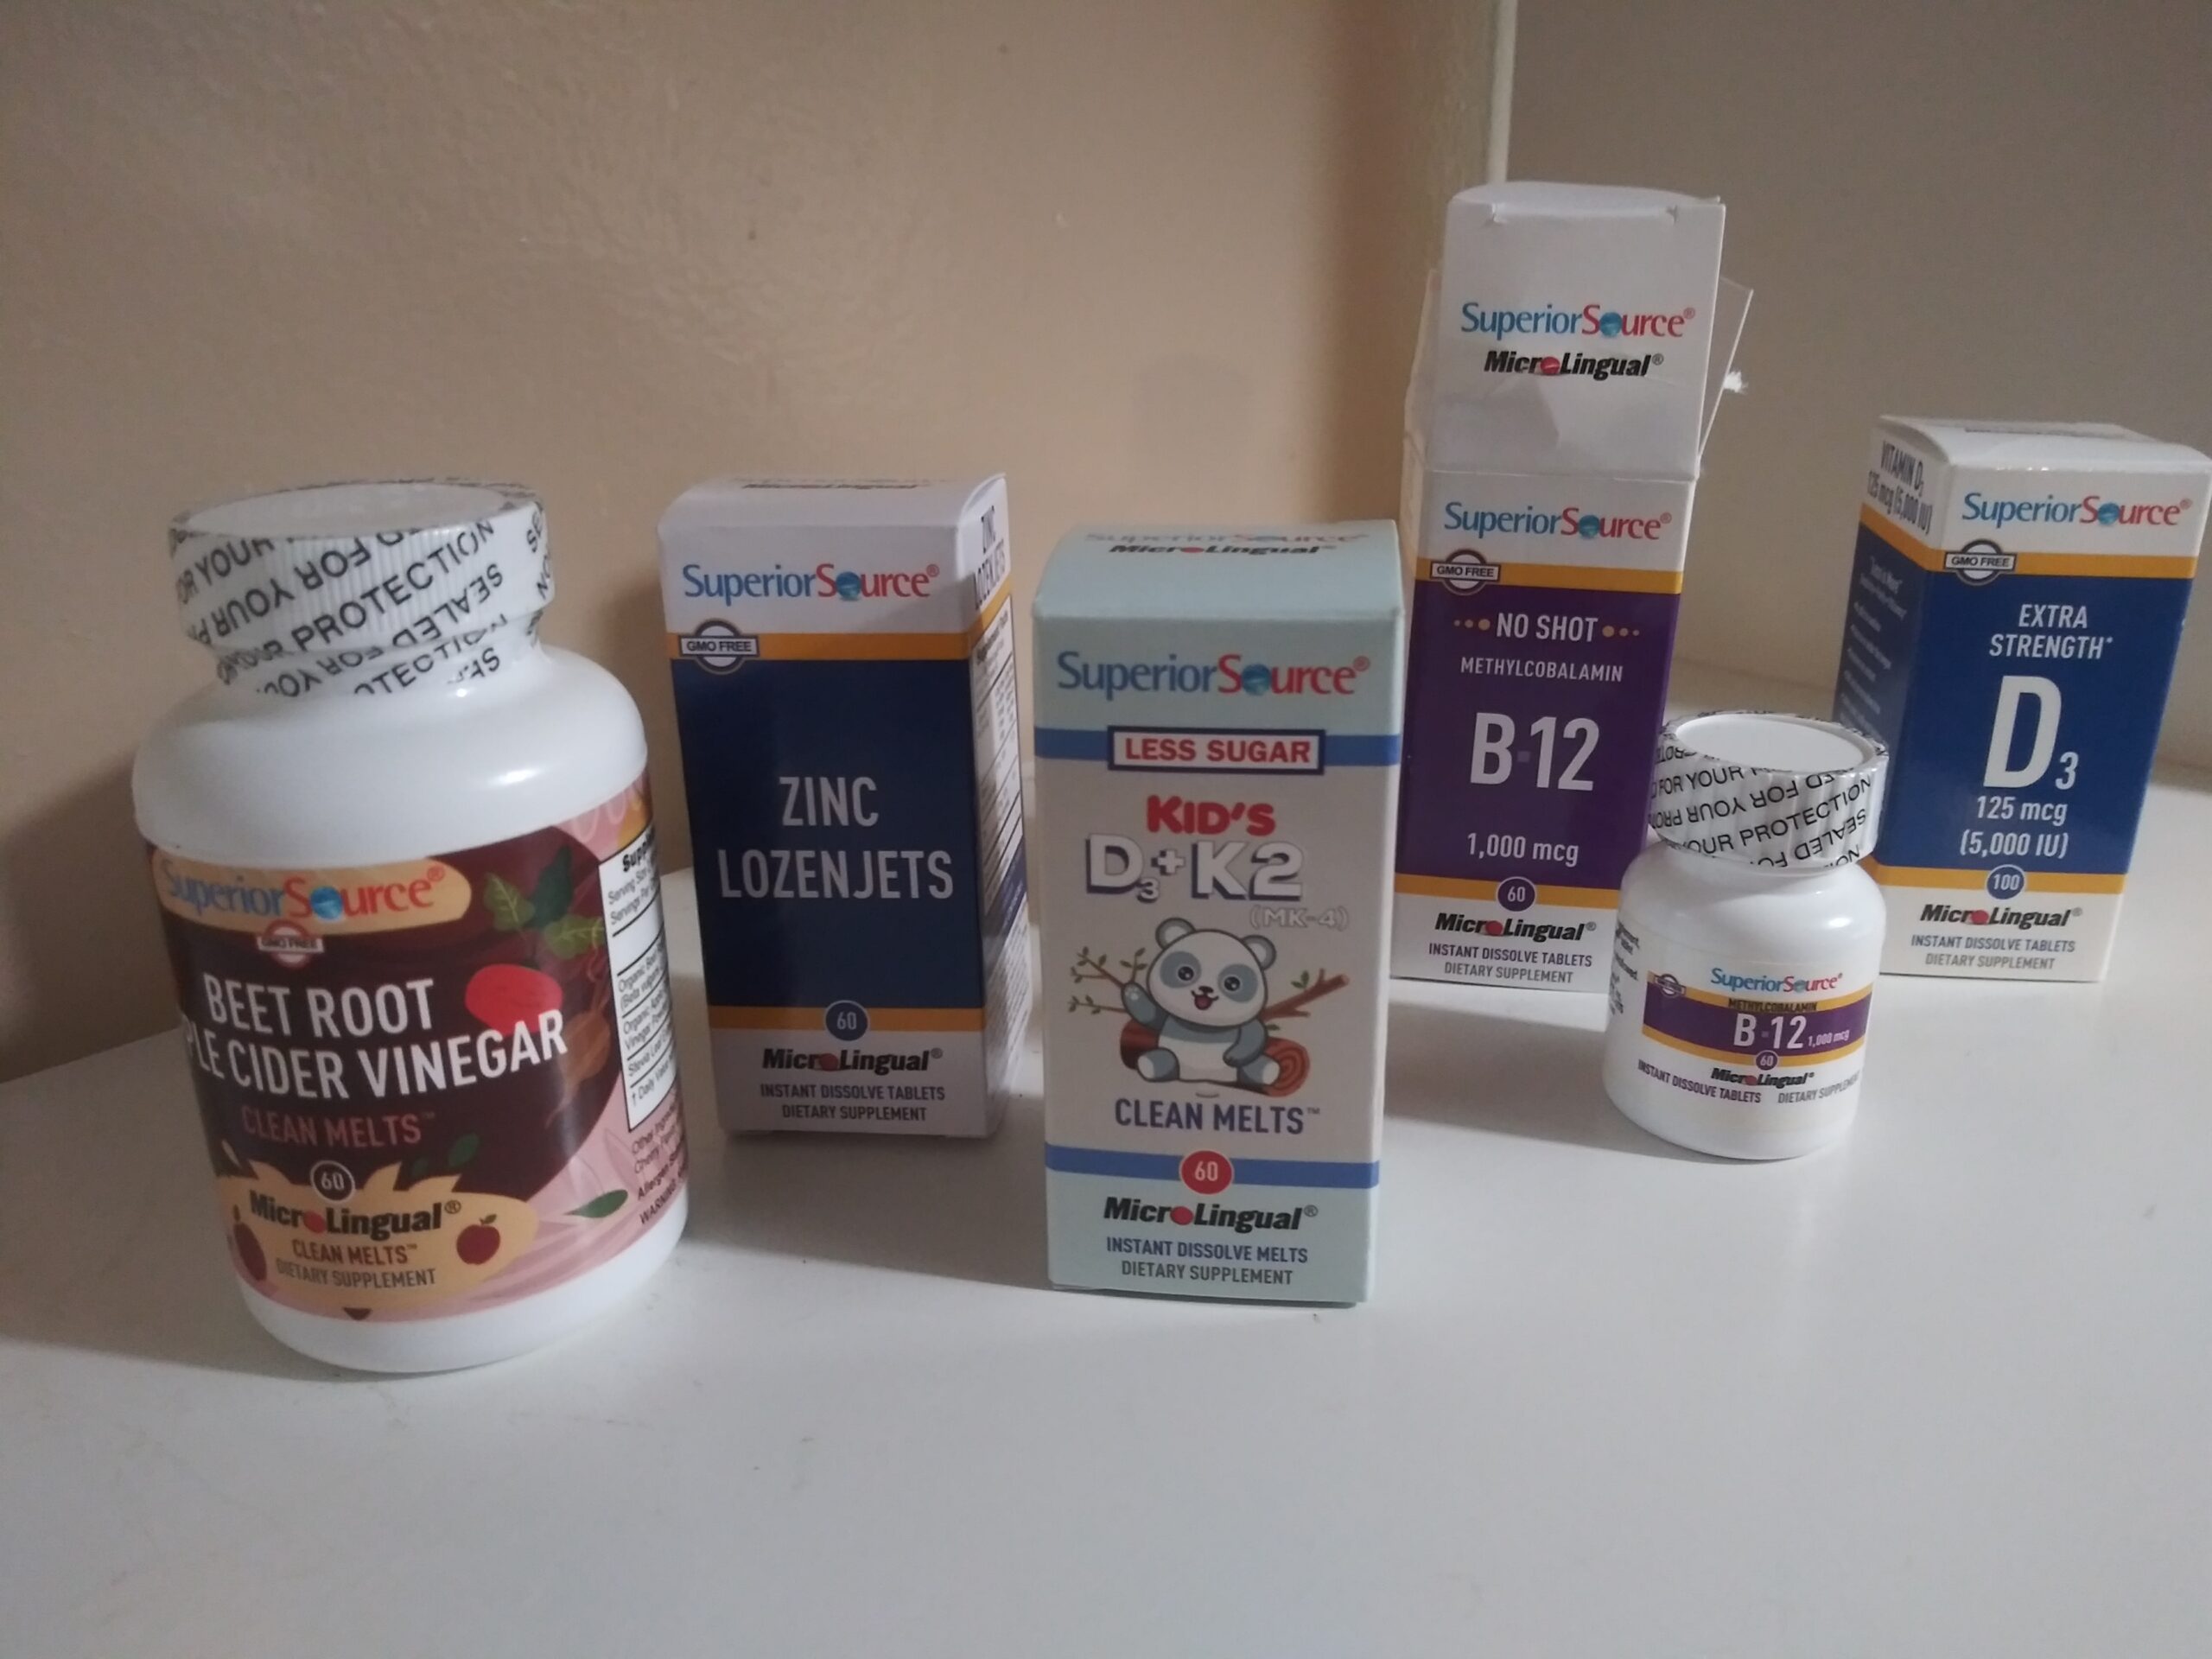 This Fall Season Stay Fortified With Superior Source Vitamins and Giveaway